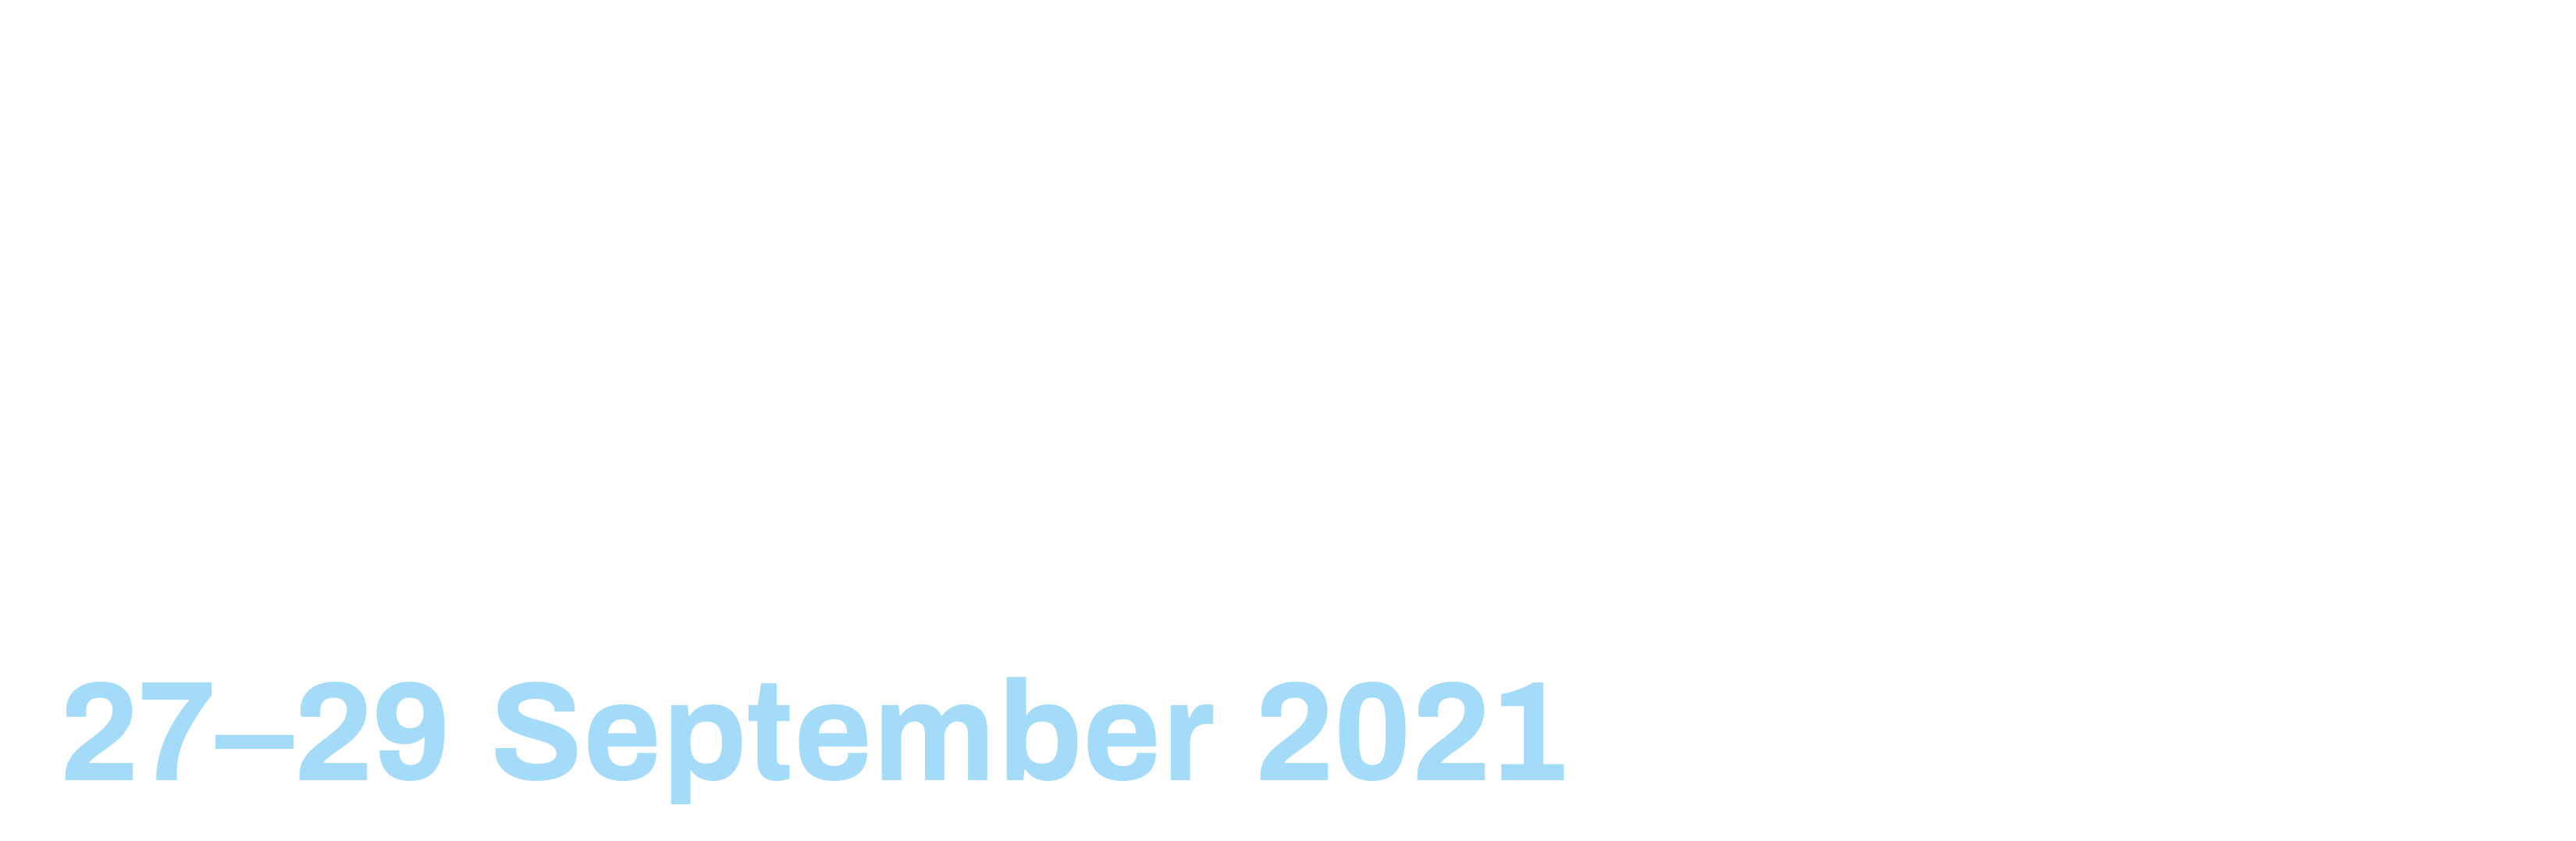 Fundraising Convention 2021